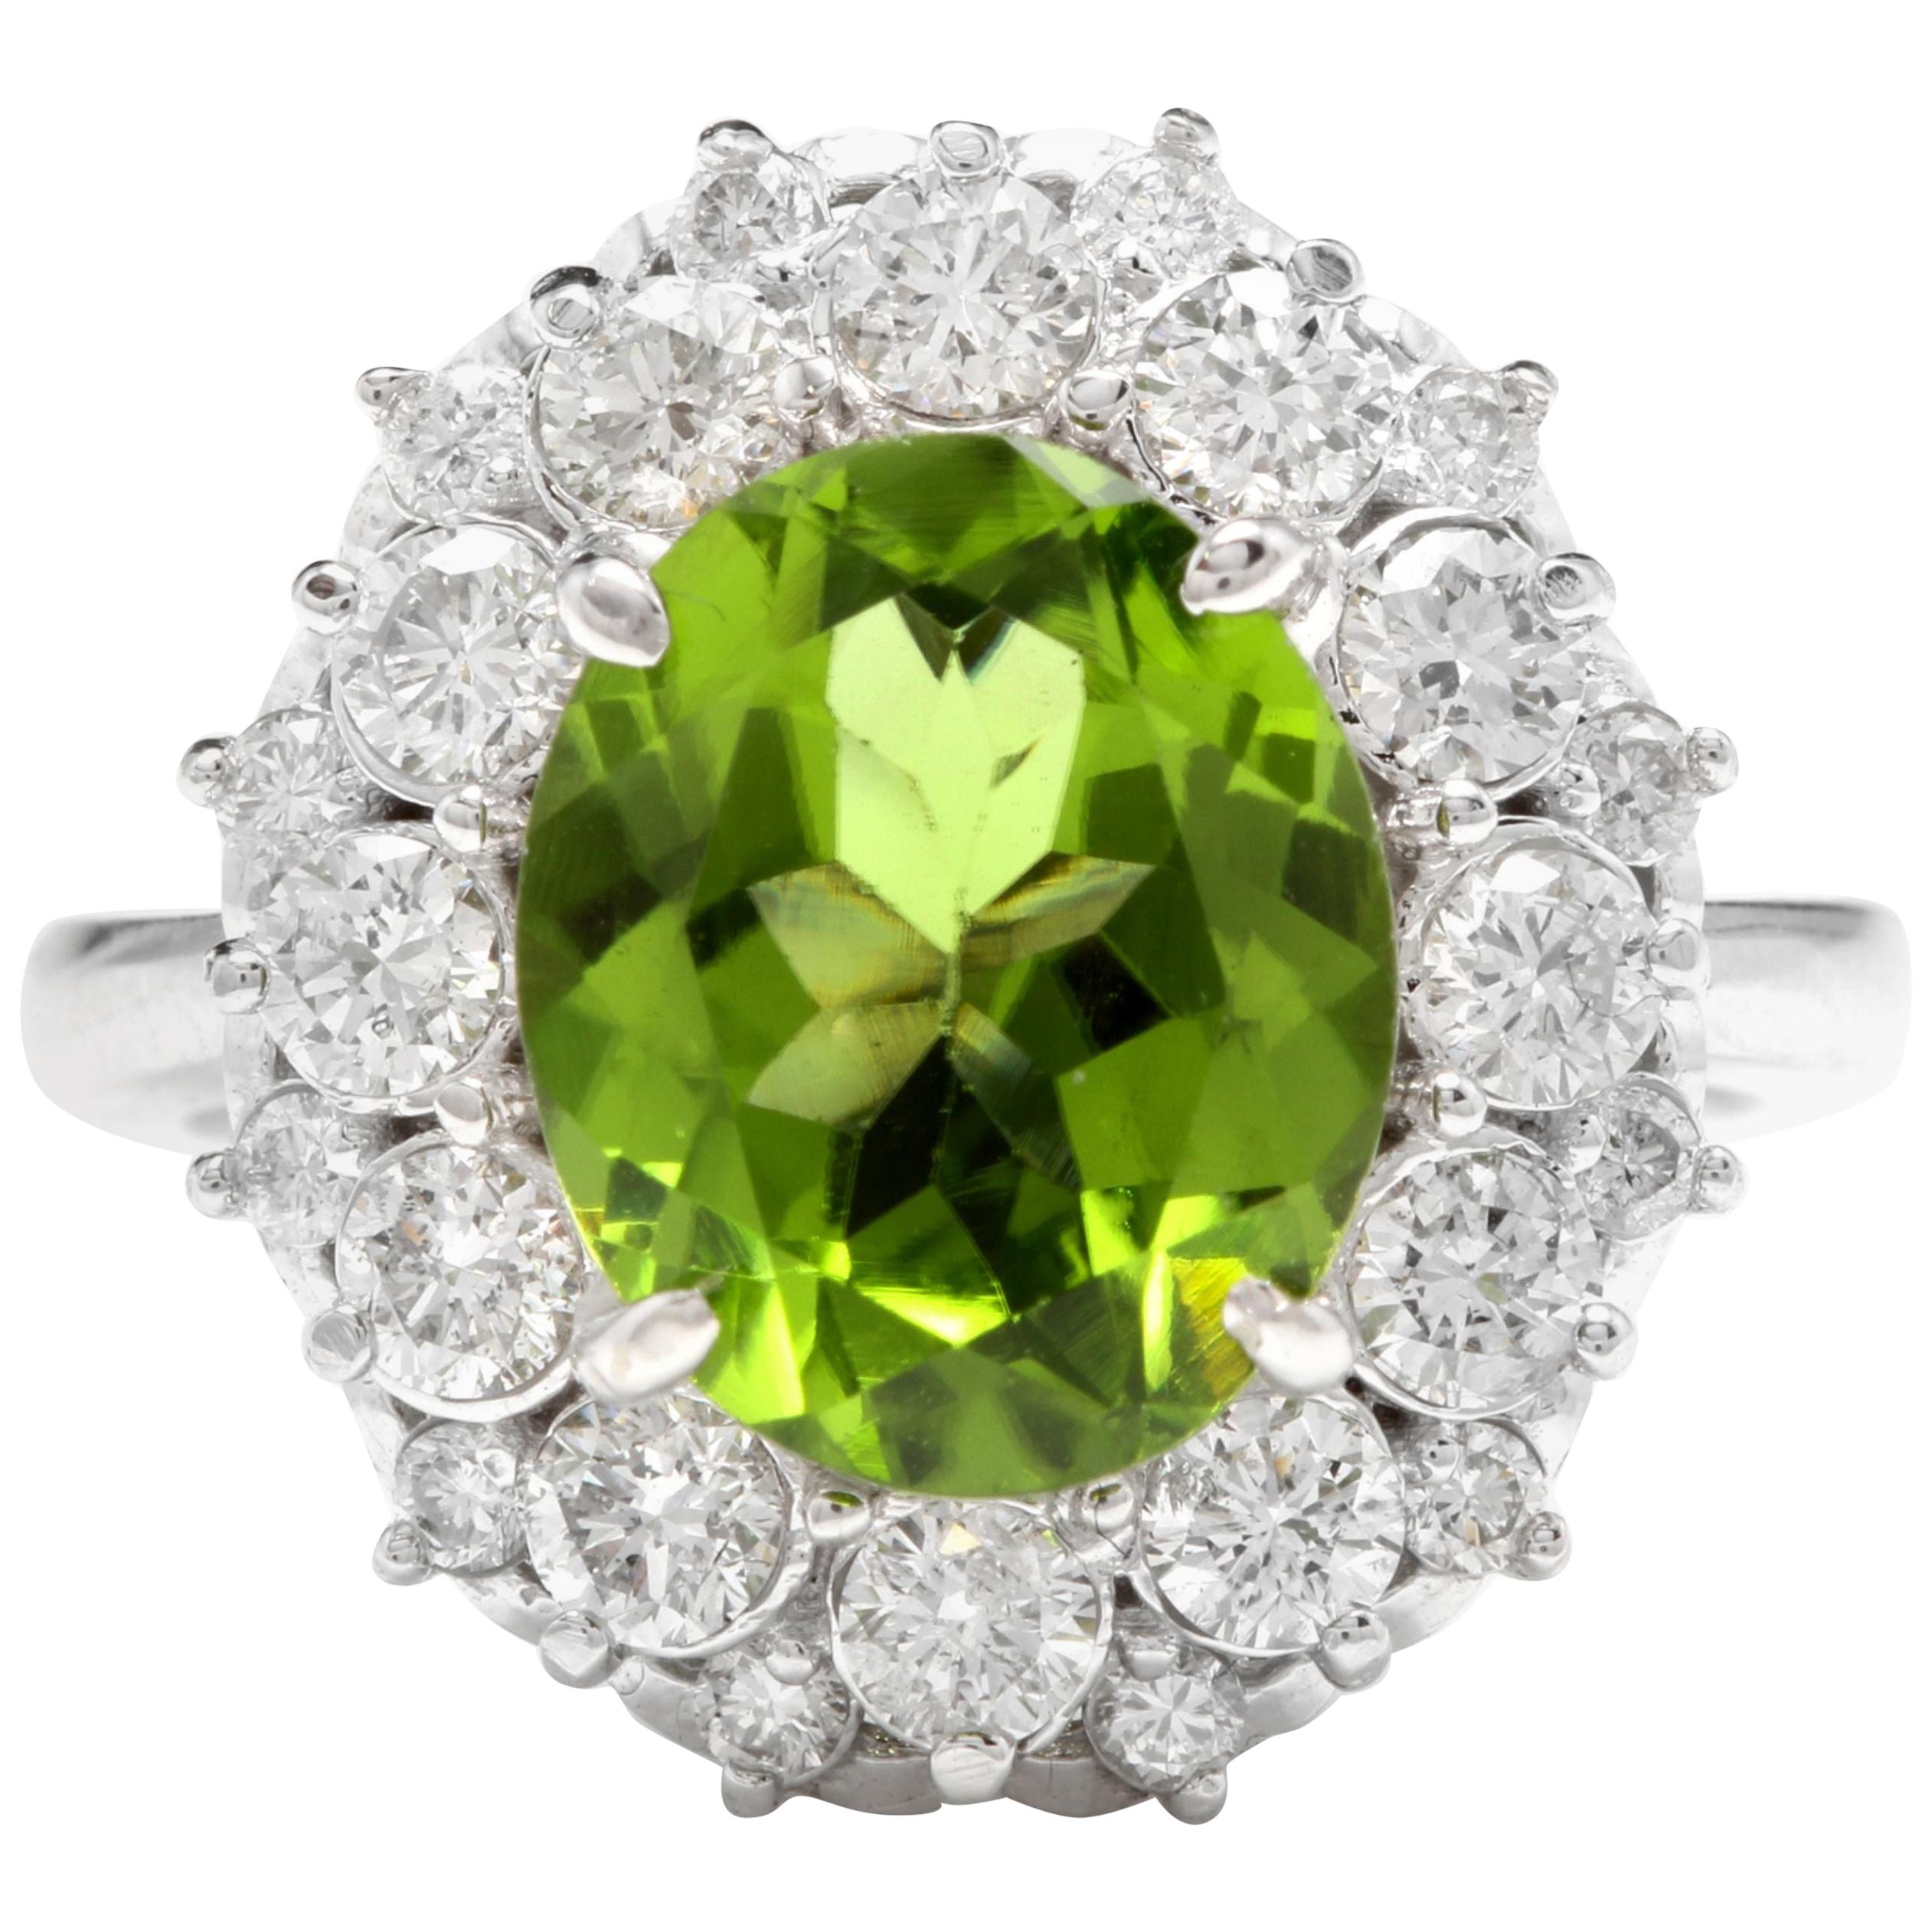 4.85 Ct Natural Very Nice Looking Peridot and Diamond 14K Solid White Gold Ring